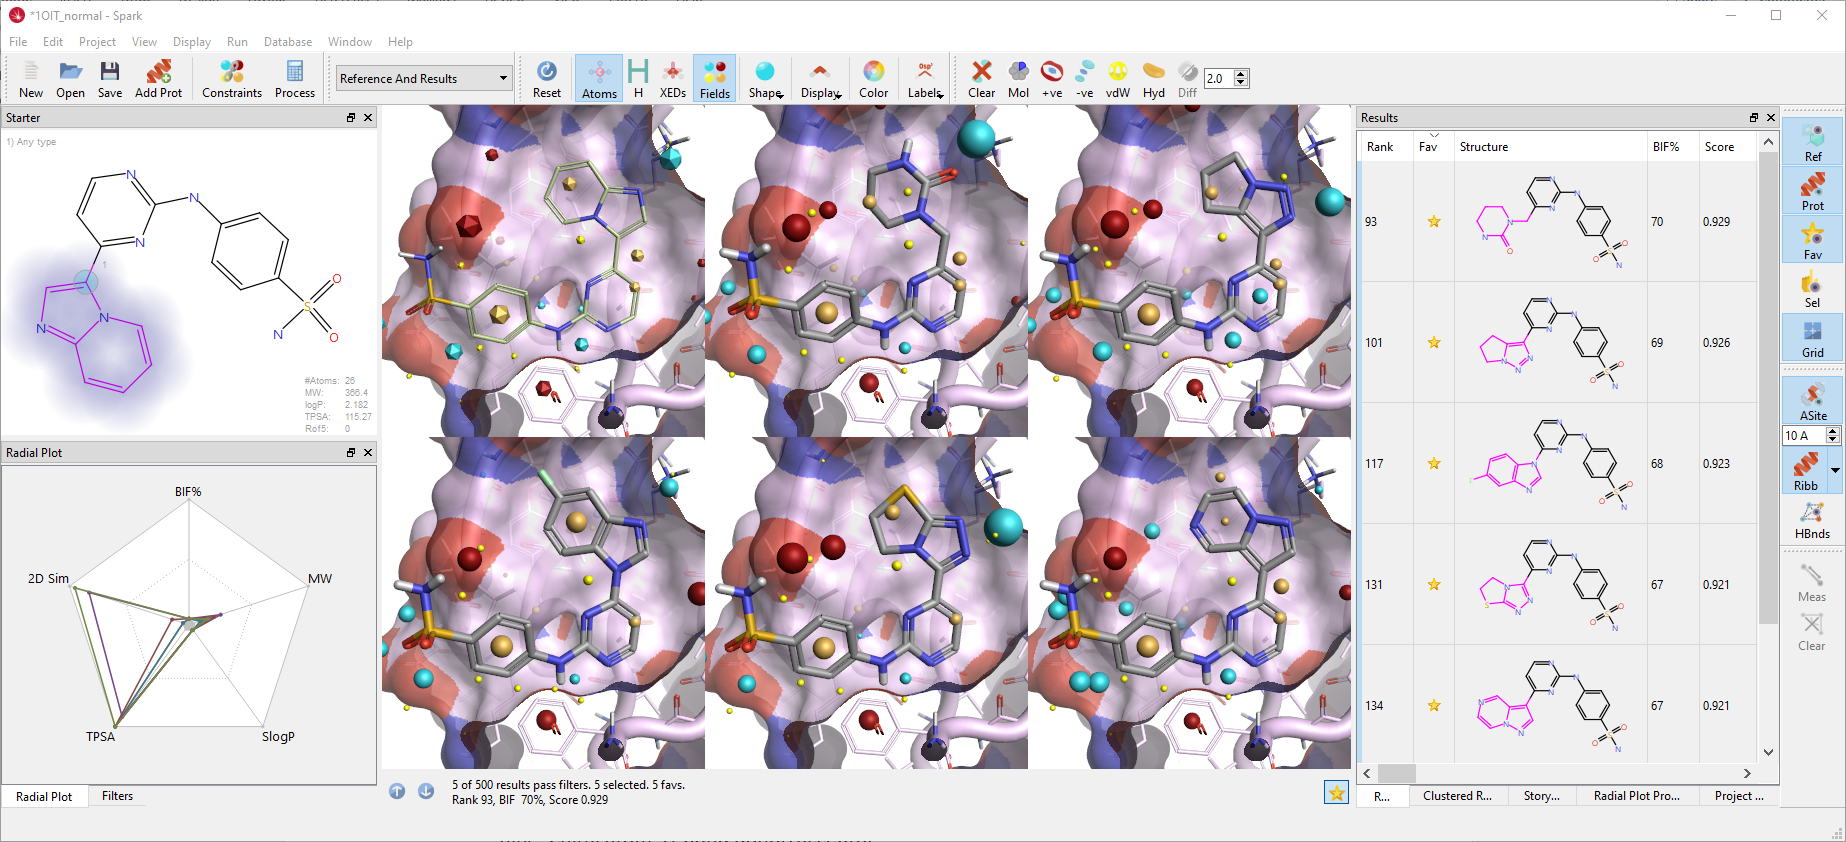 R-group replacement experiment on PDB: 1OIT